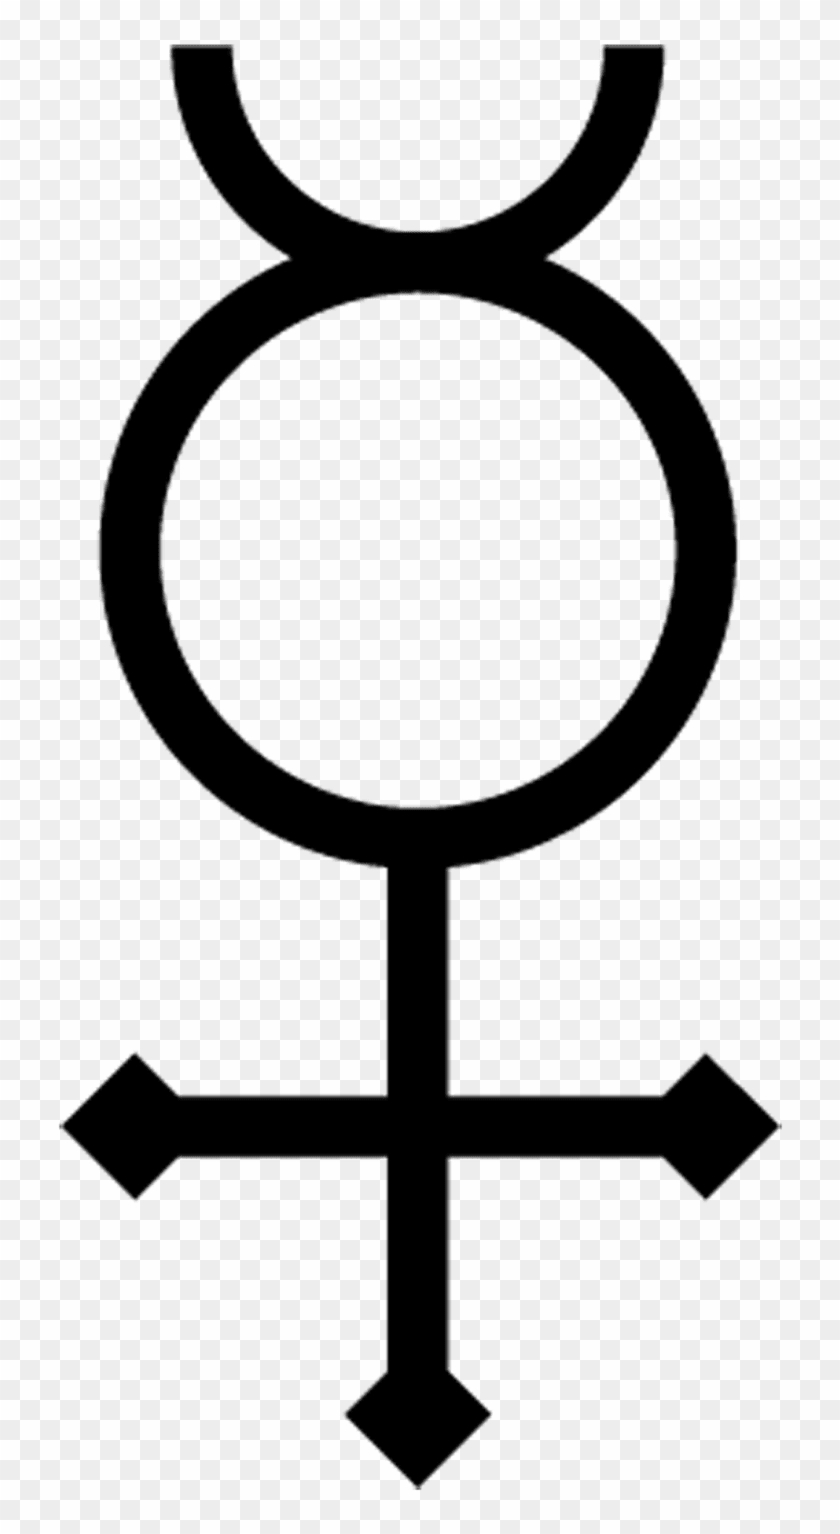 Alchemy Symbols And Meanings - Copper Alchemical Symbol #1055174